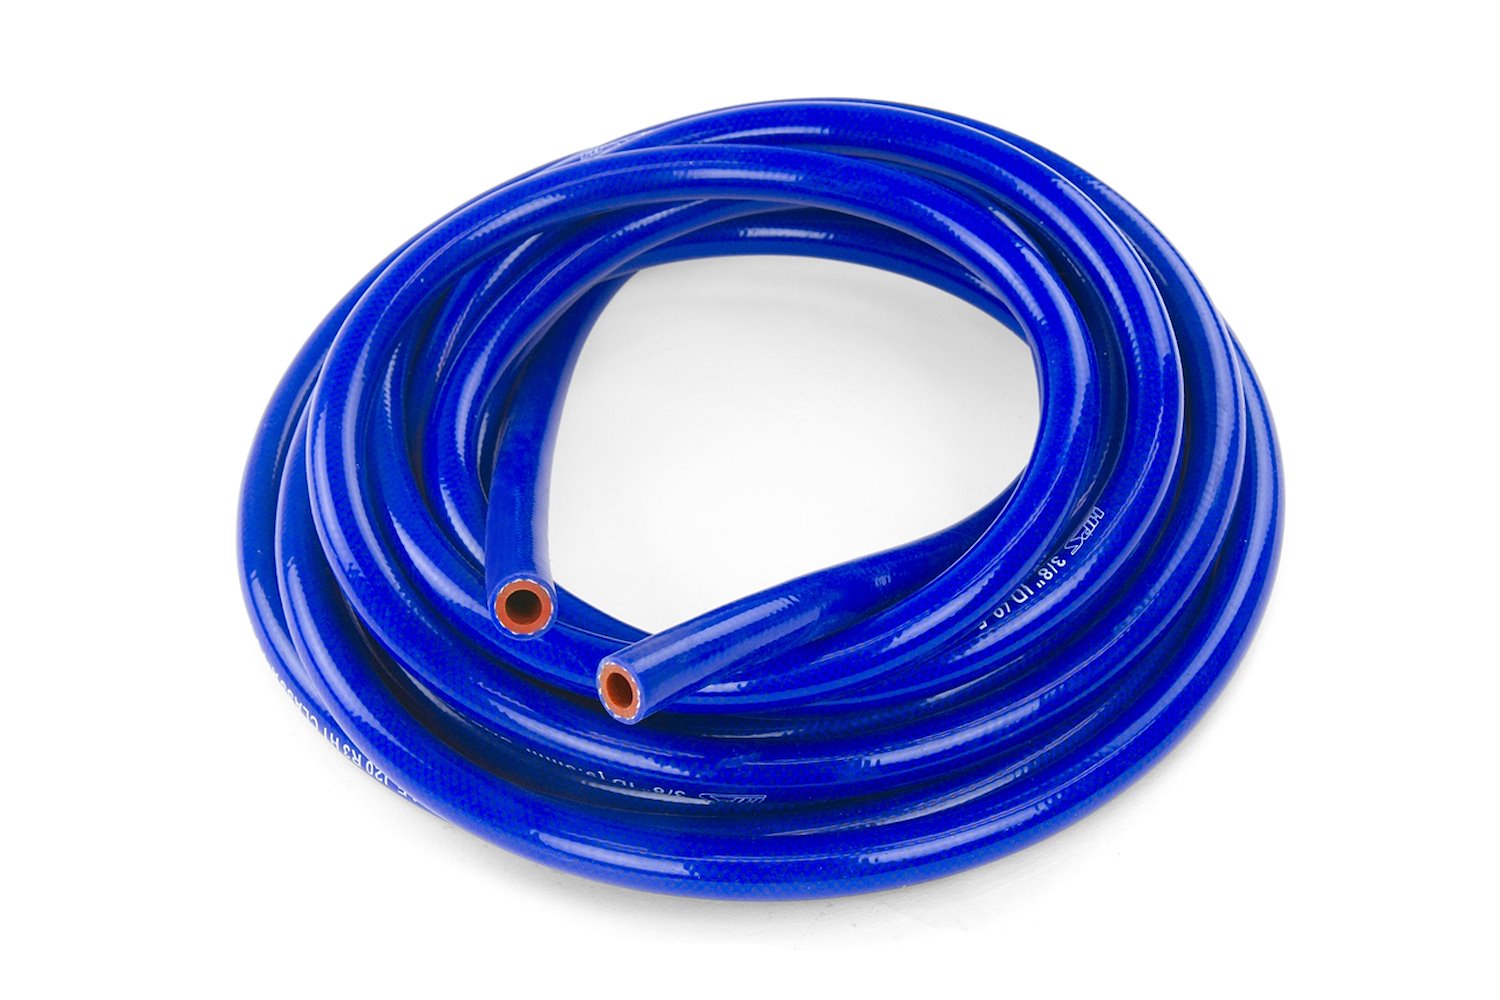 HTHH-032-BLUEx25 Silicone Heater Hose Tubing, High-Temp Reinforced, 5/16 in. ID, 25 ft. Roll, Blue